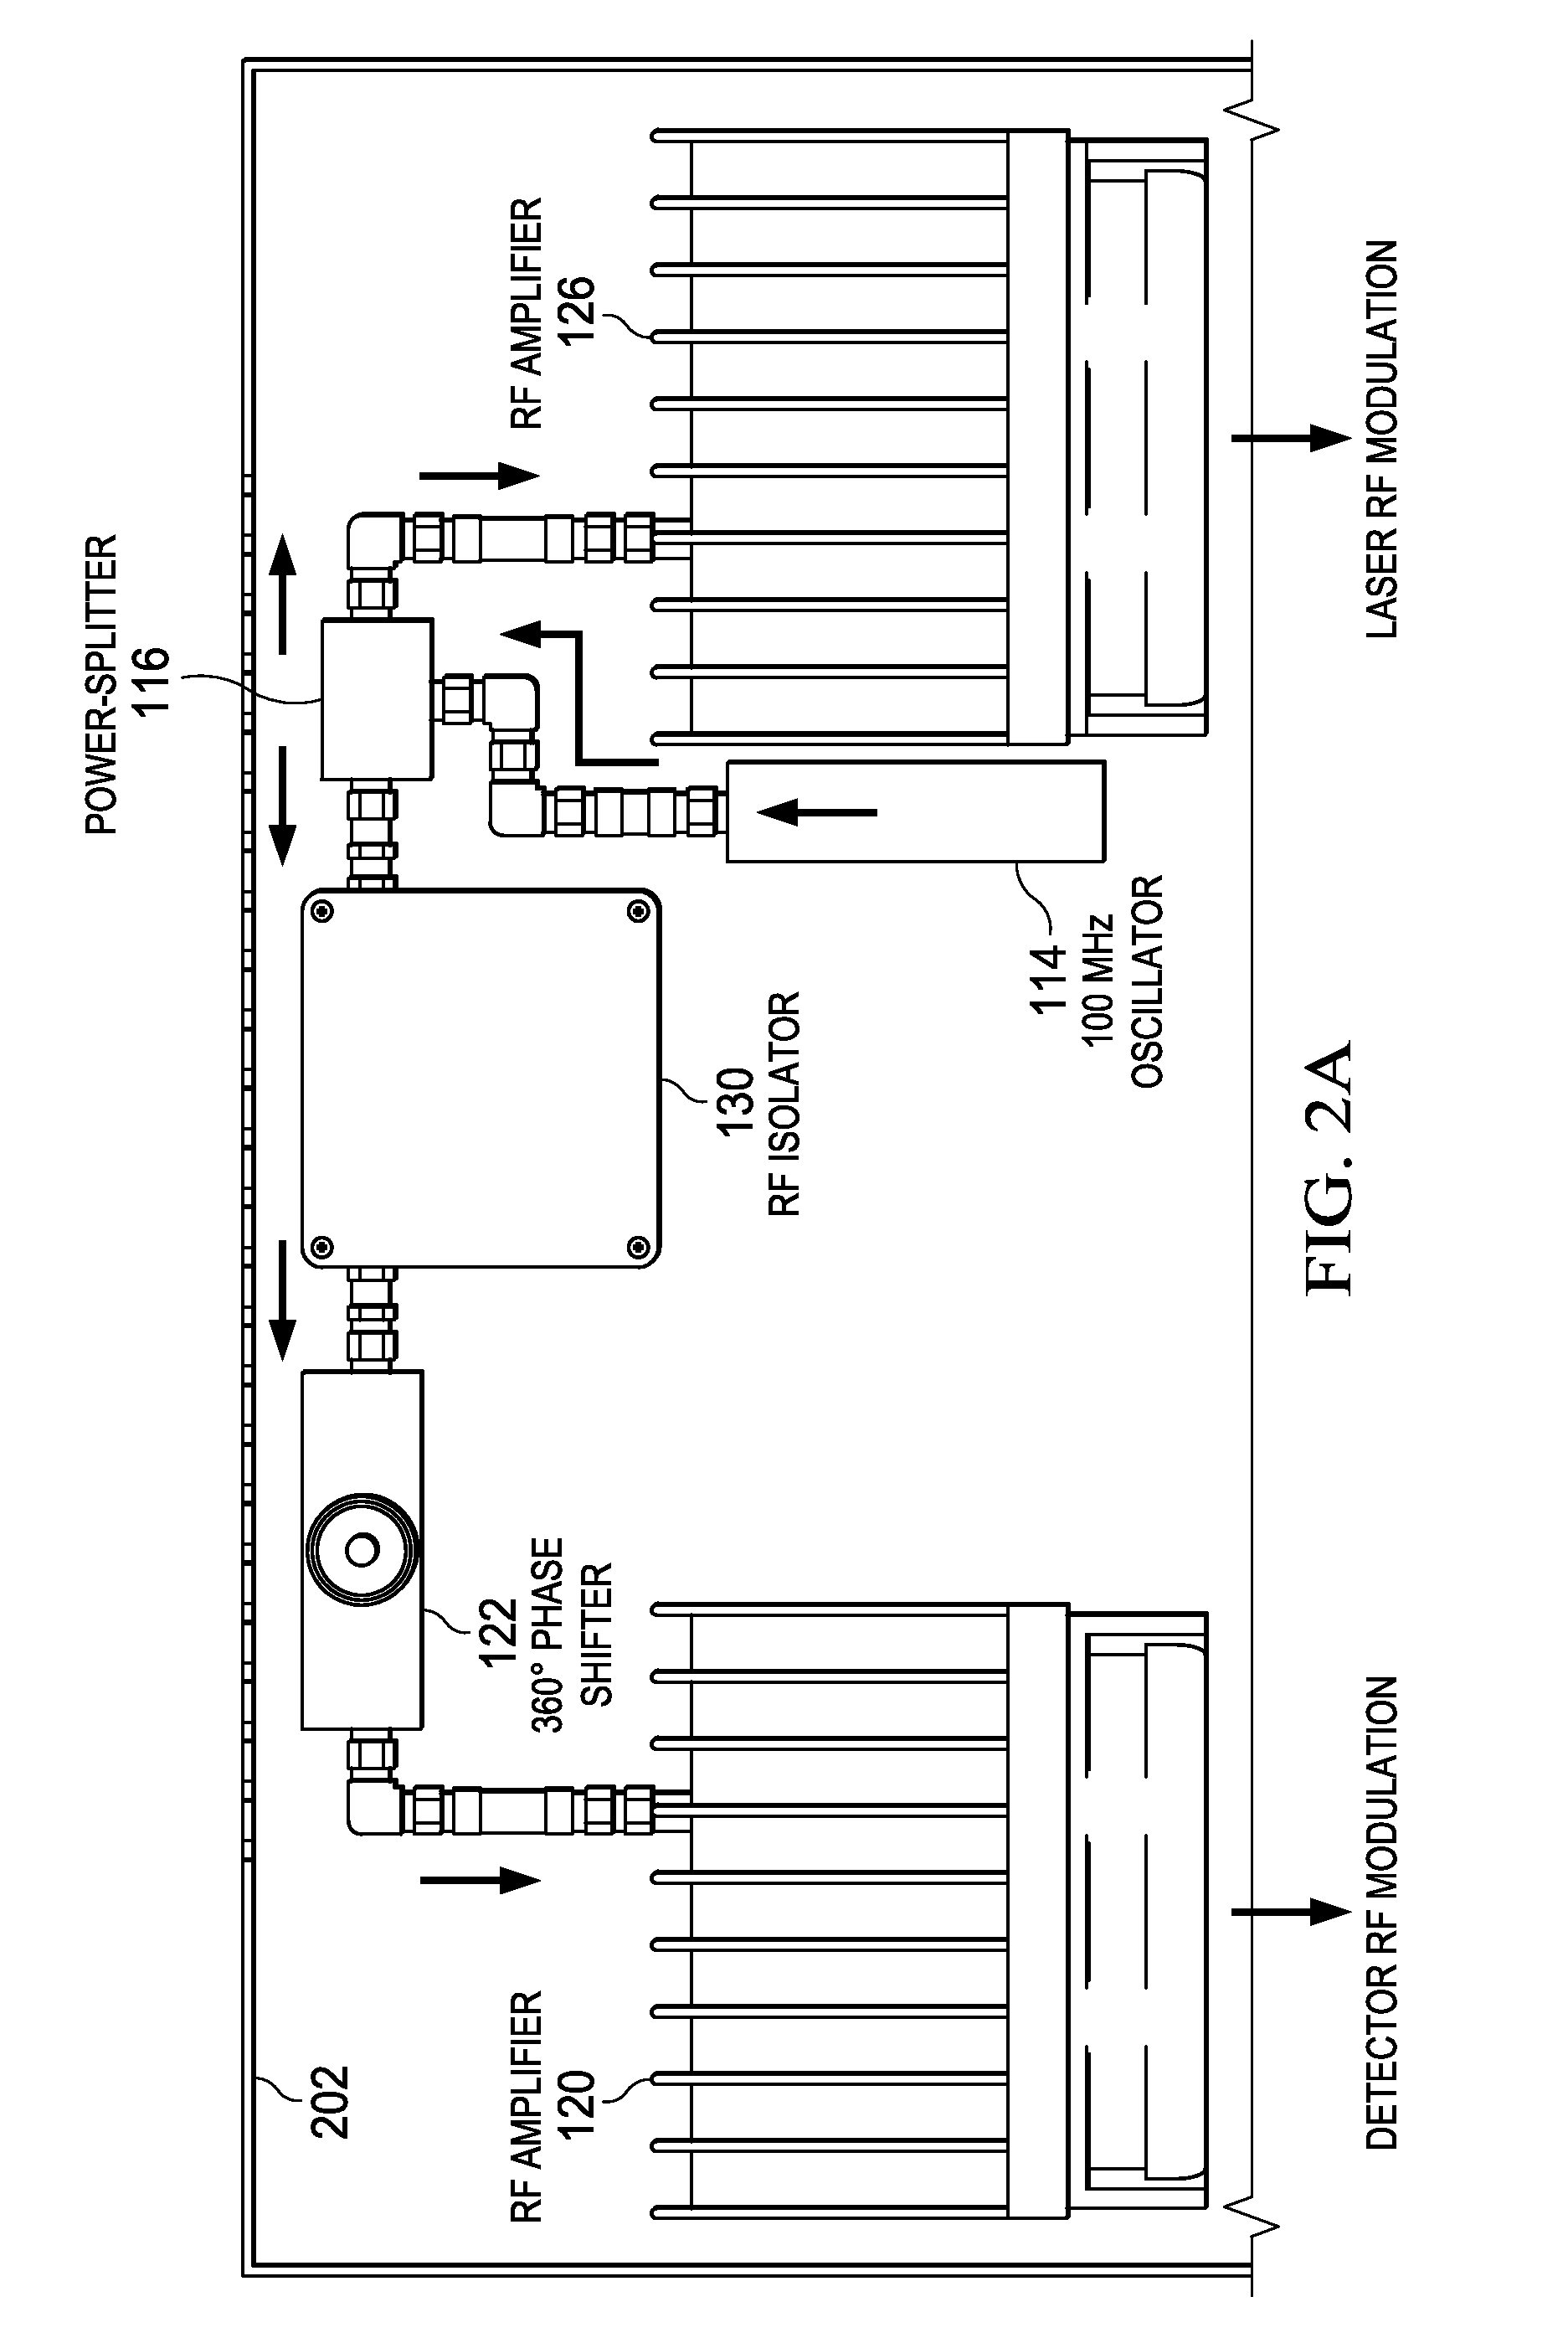 System and method for fluorescence tomography